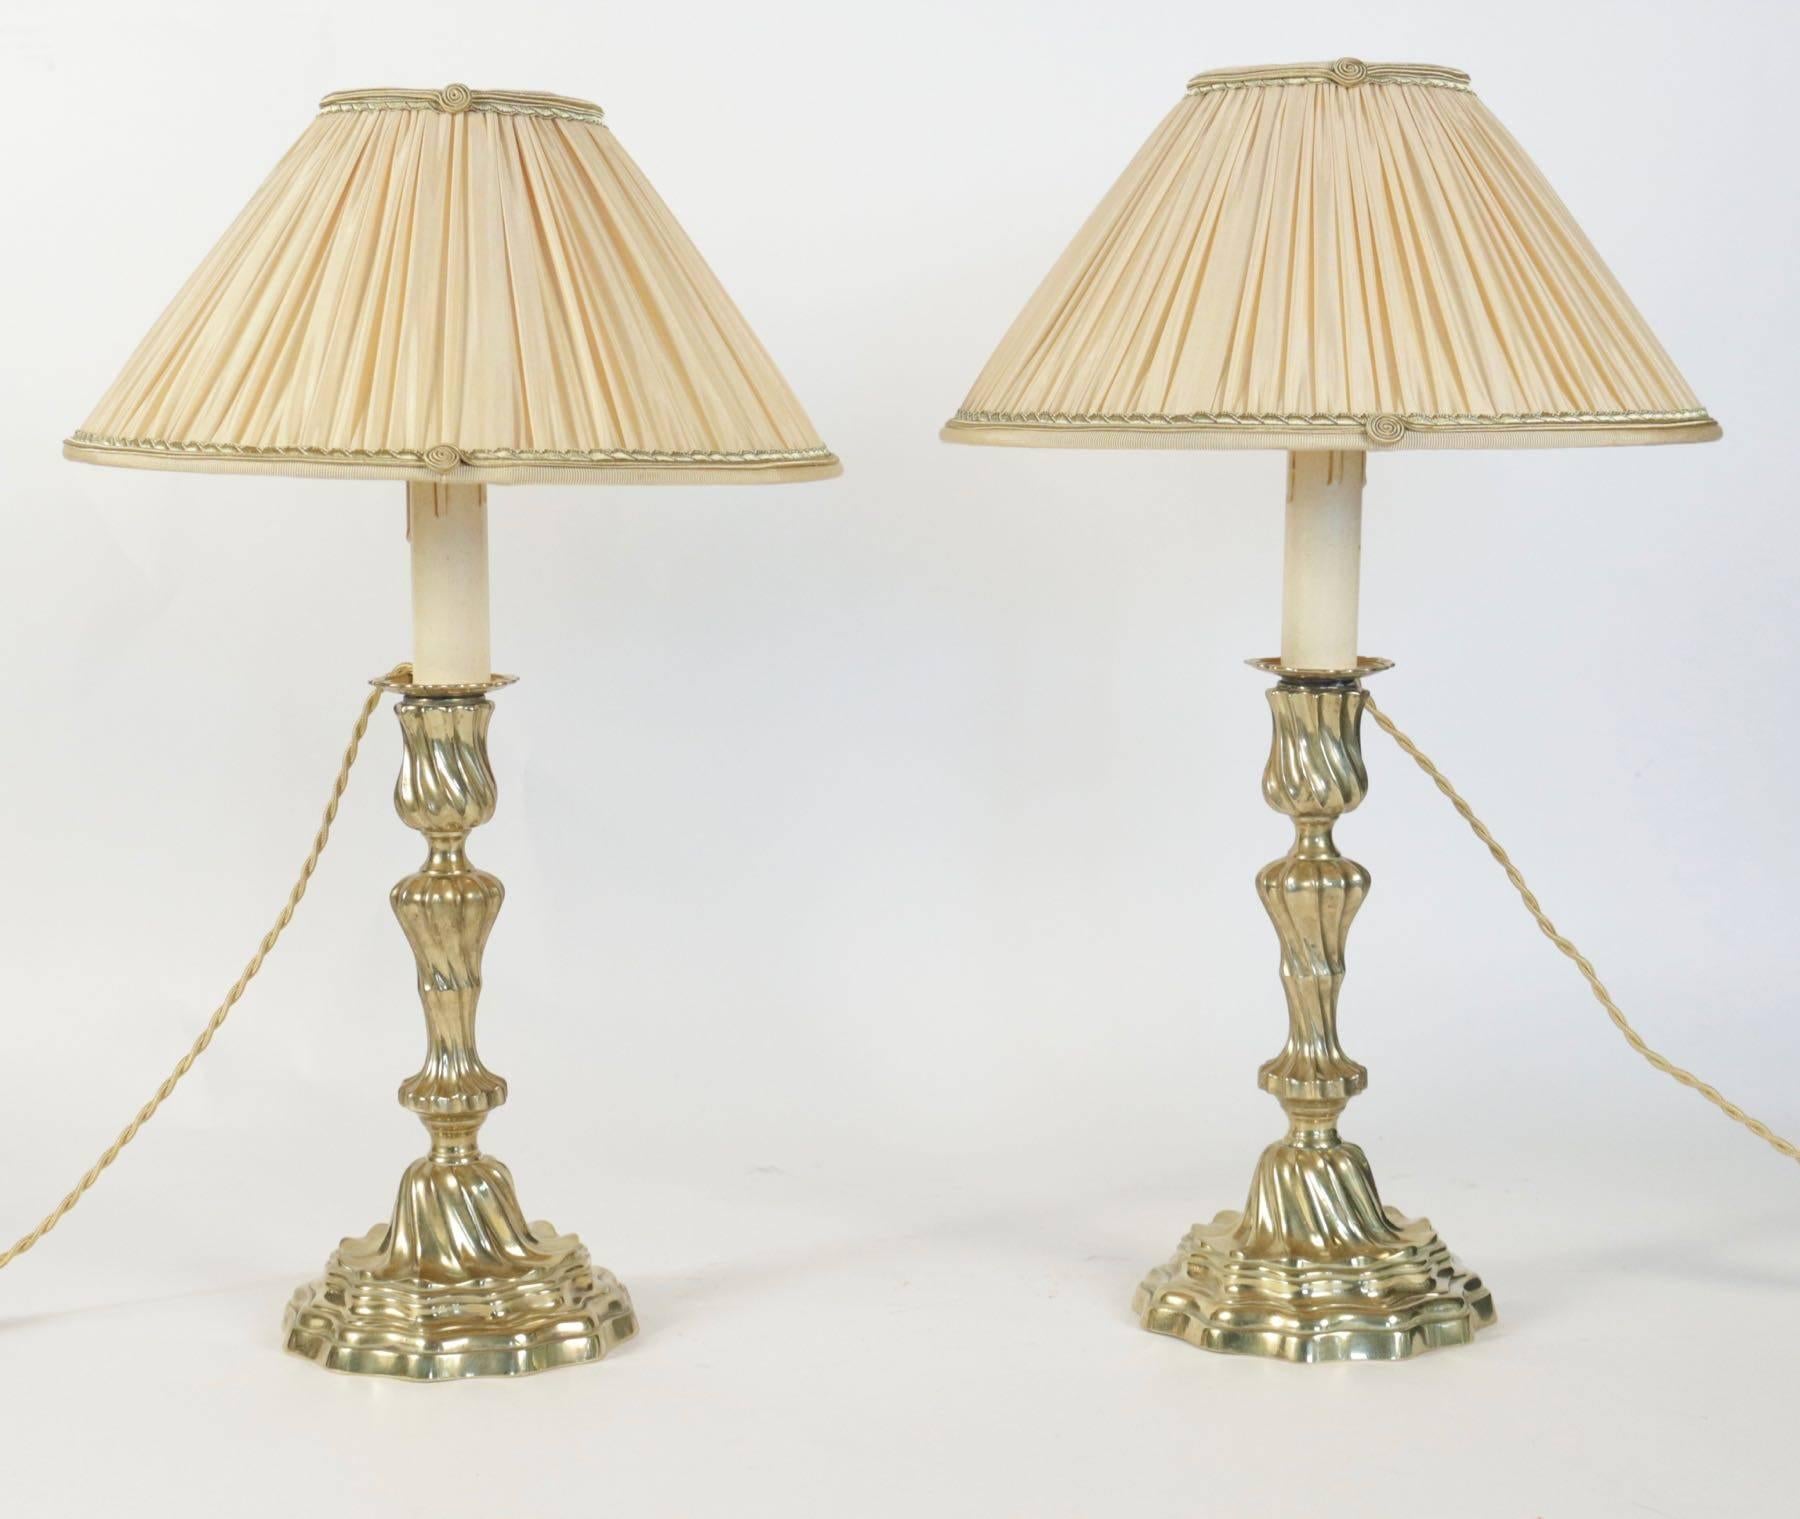 A nicely pair of Louis XV period original gilt bronze candlesticks. The candlestick rests on a circular base.
The candlesticks converted to table lamps with new pleated light yellow and gilded band silk lampshades.
French work, circa 1760.